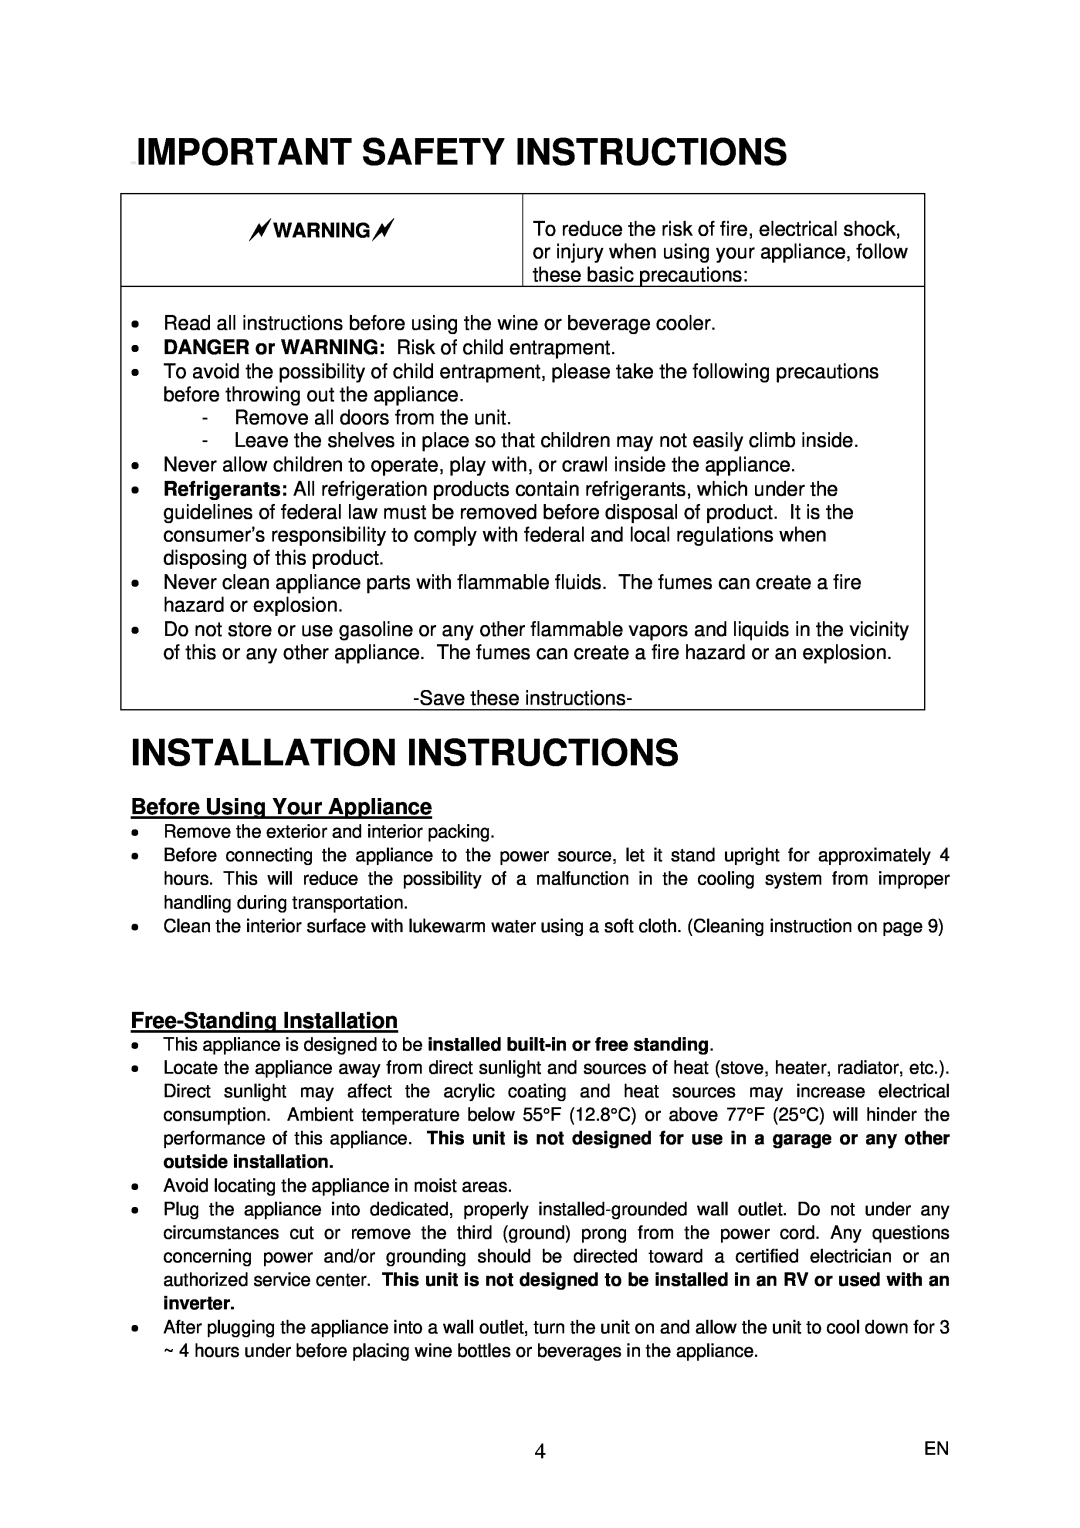 Magic Chef MCWC50DST Important Safety Instructions, Installation Instructions, Before Using Your Appliance 